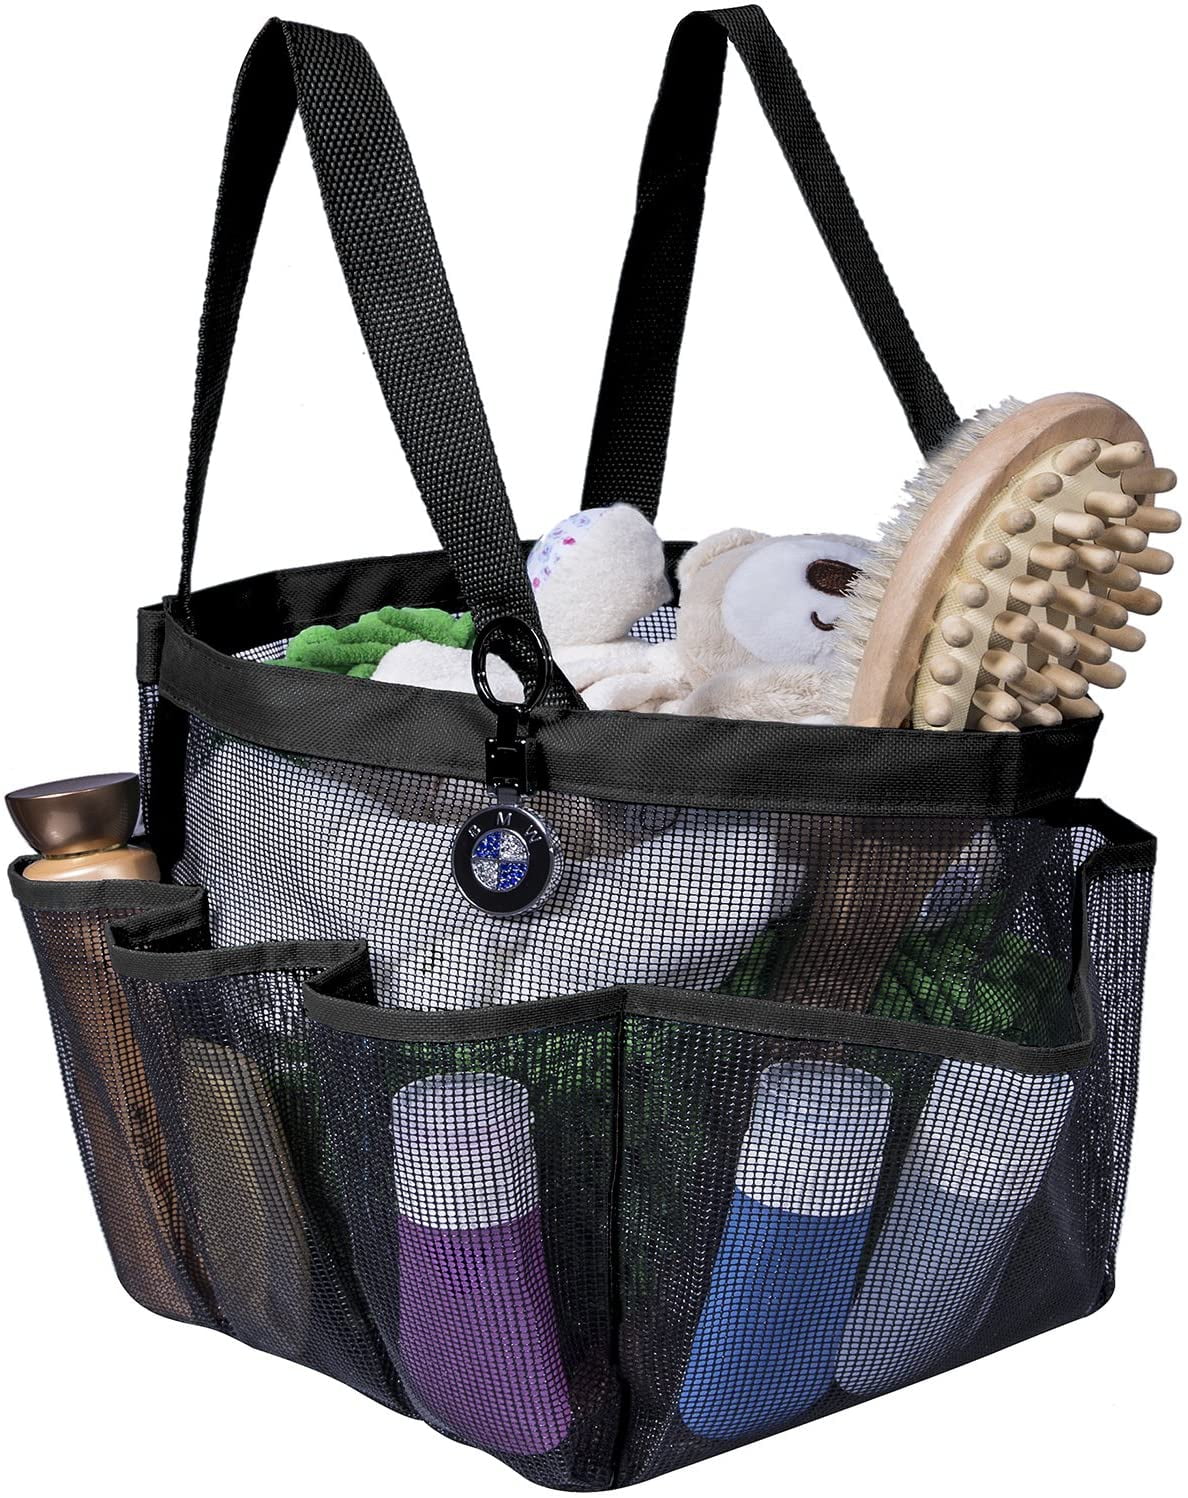 Quick Dry Organizer Caddy Storage Pouch Toiletry Carry Shower Tote Mesh Bag 